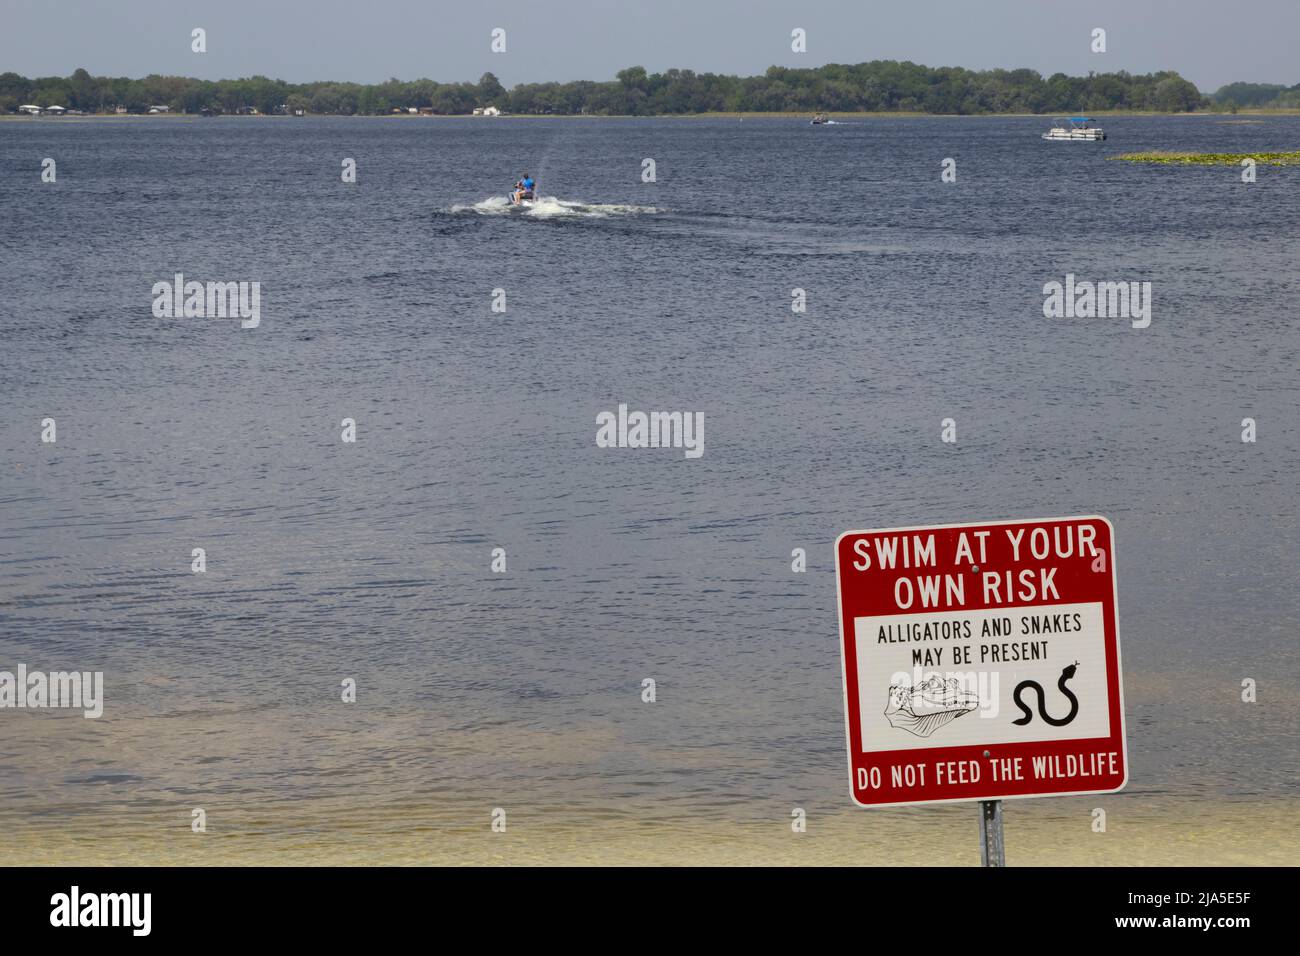 Warning sign at a Florida lake: Swim At Your Own Risk, Alligators and Snakes May Be Present Stock Photo